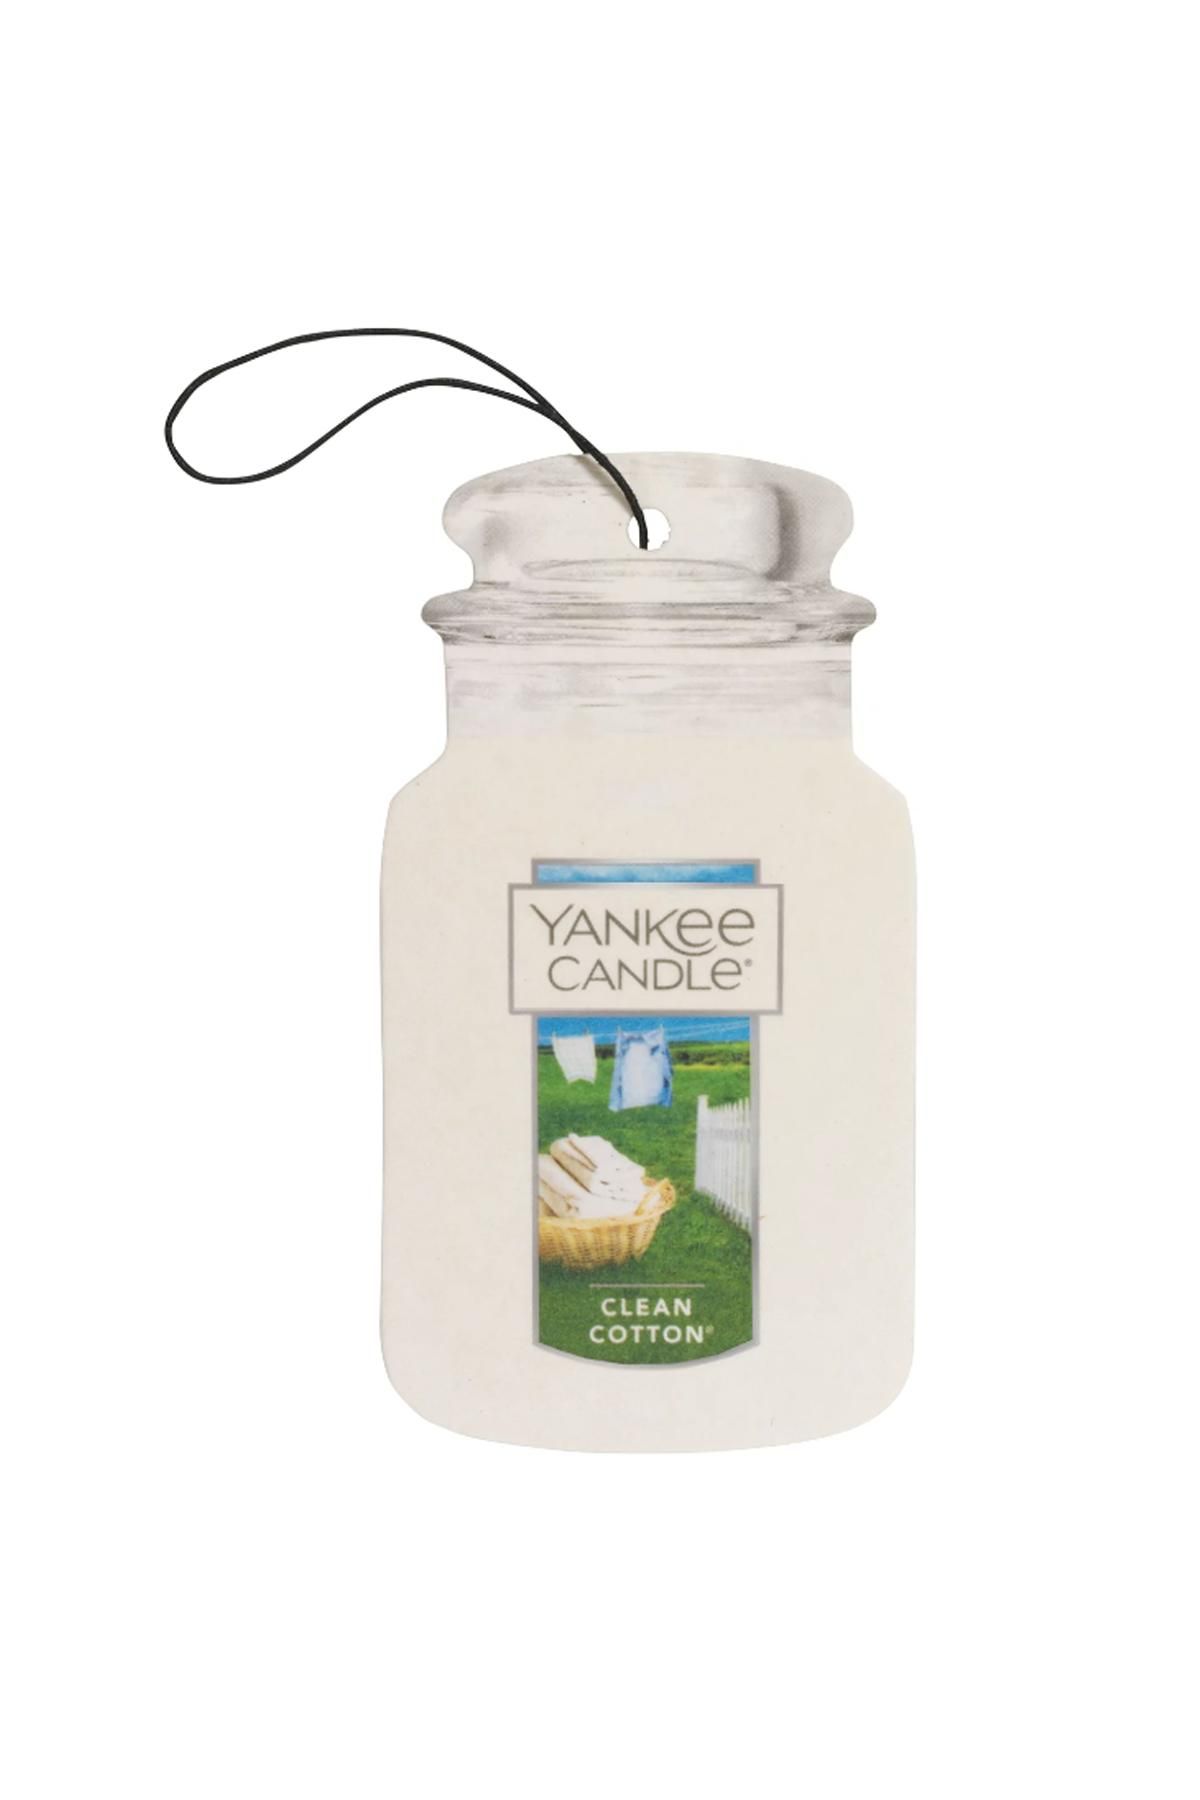 YANKEE CANDLE Clean Cotton Candles